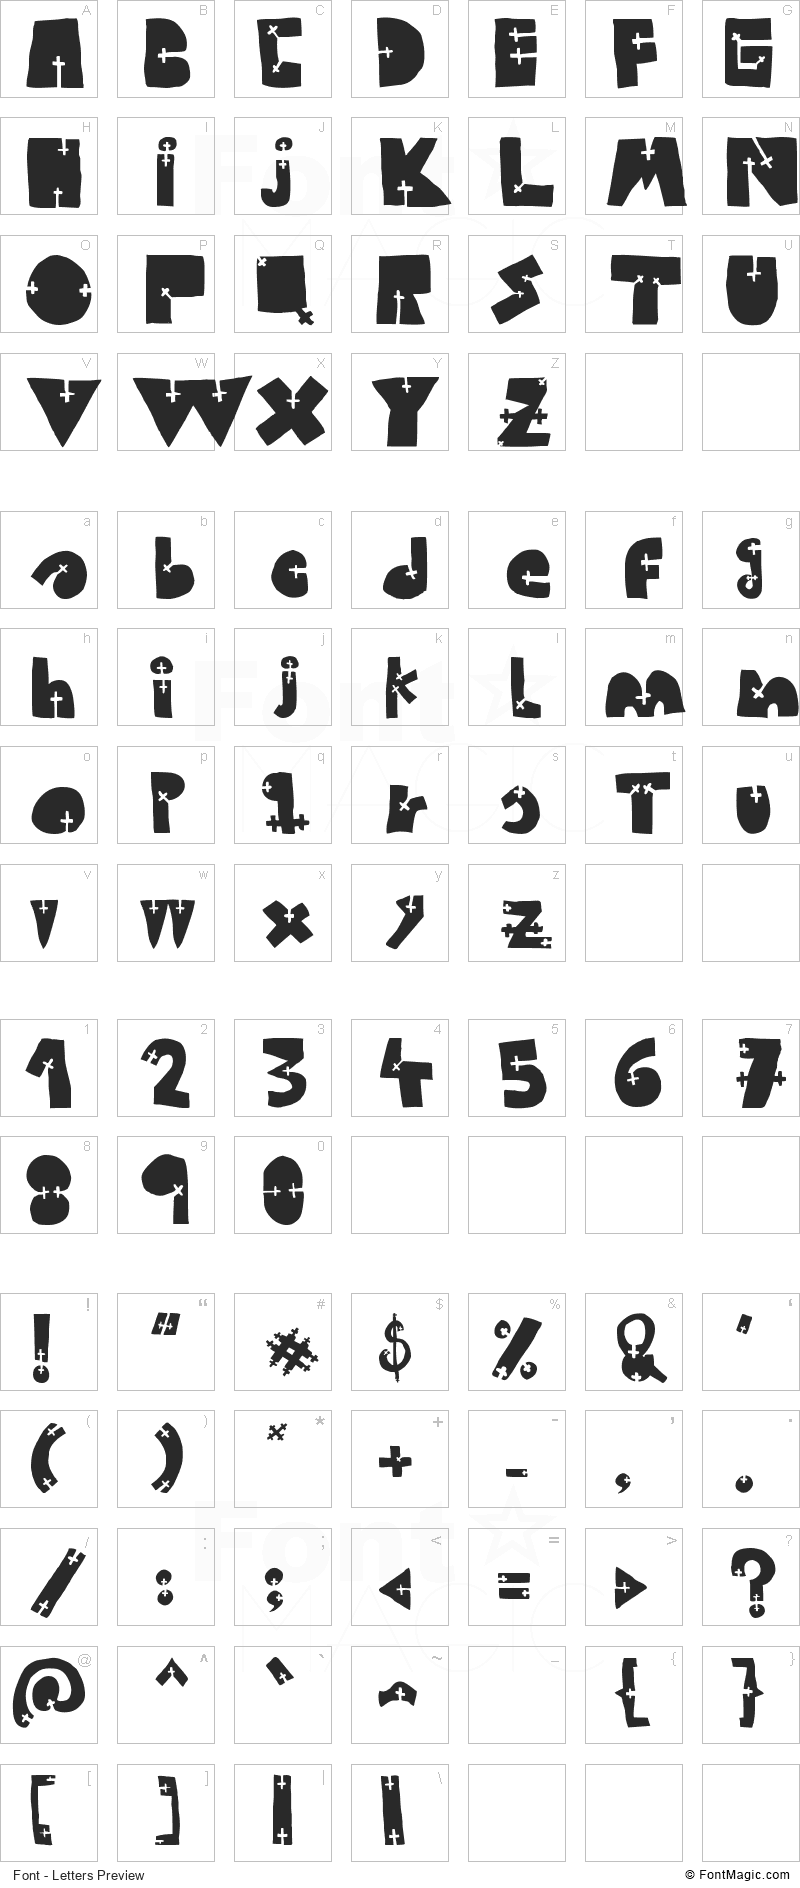 Woodcutter Cross Font - All Latters Preview Chart